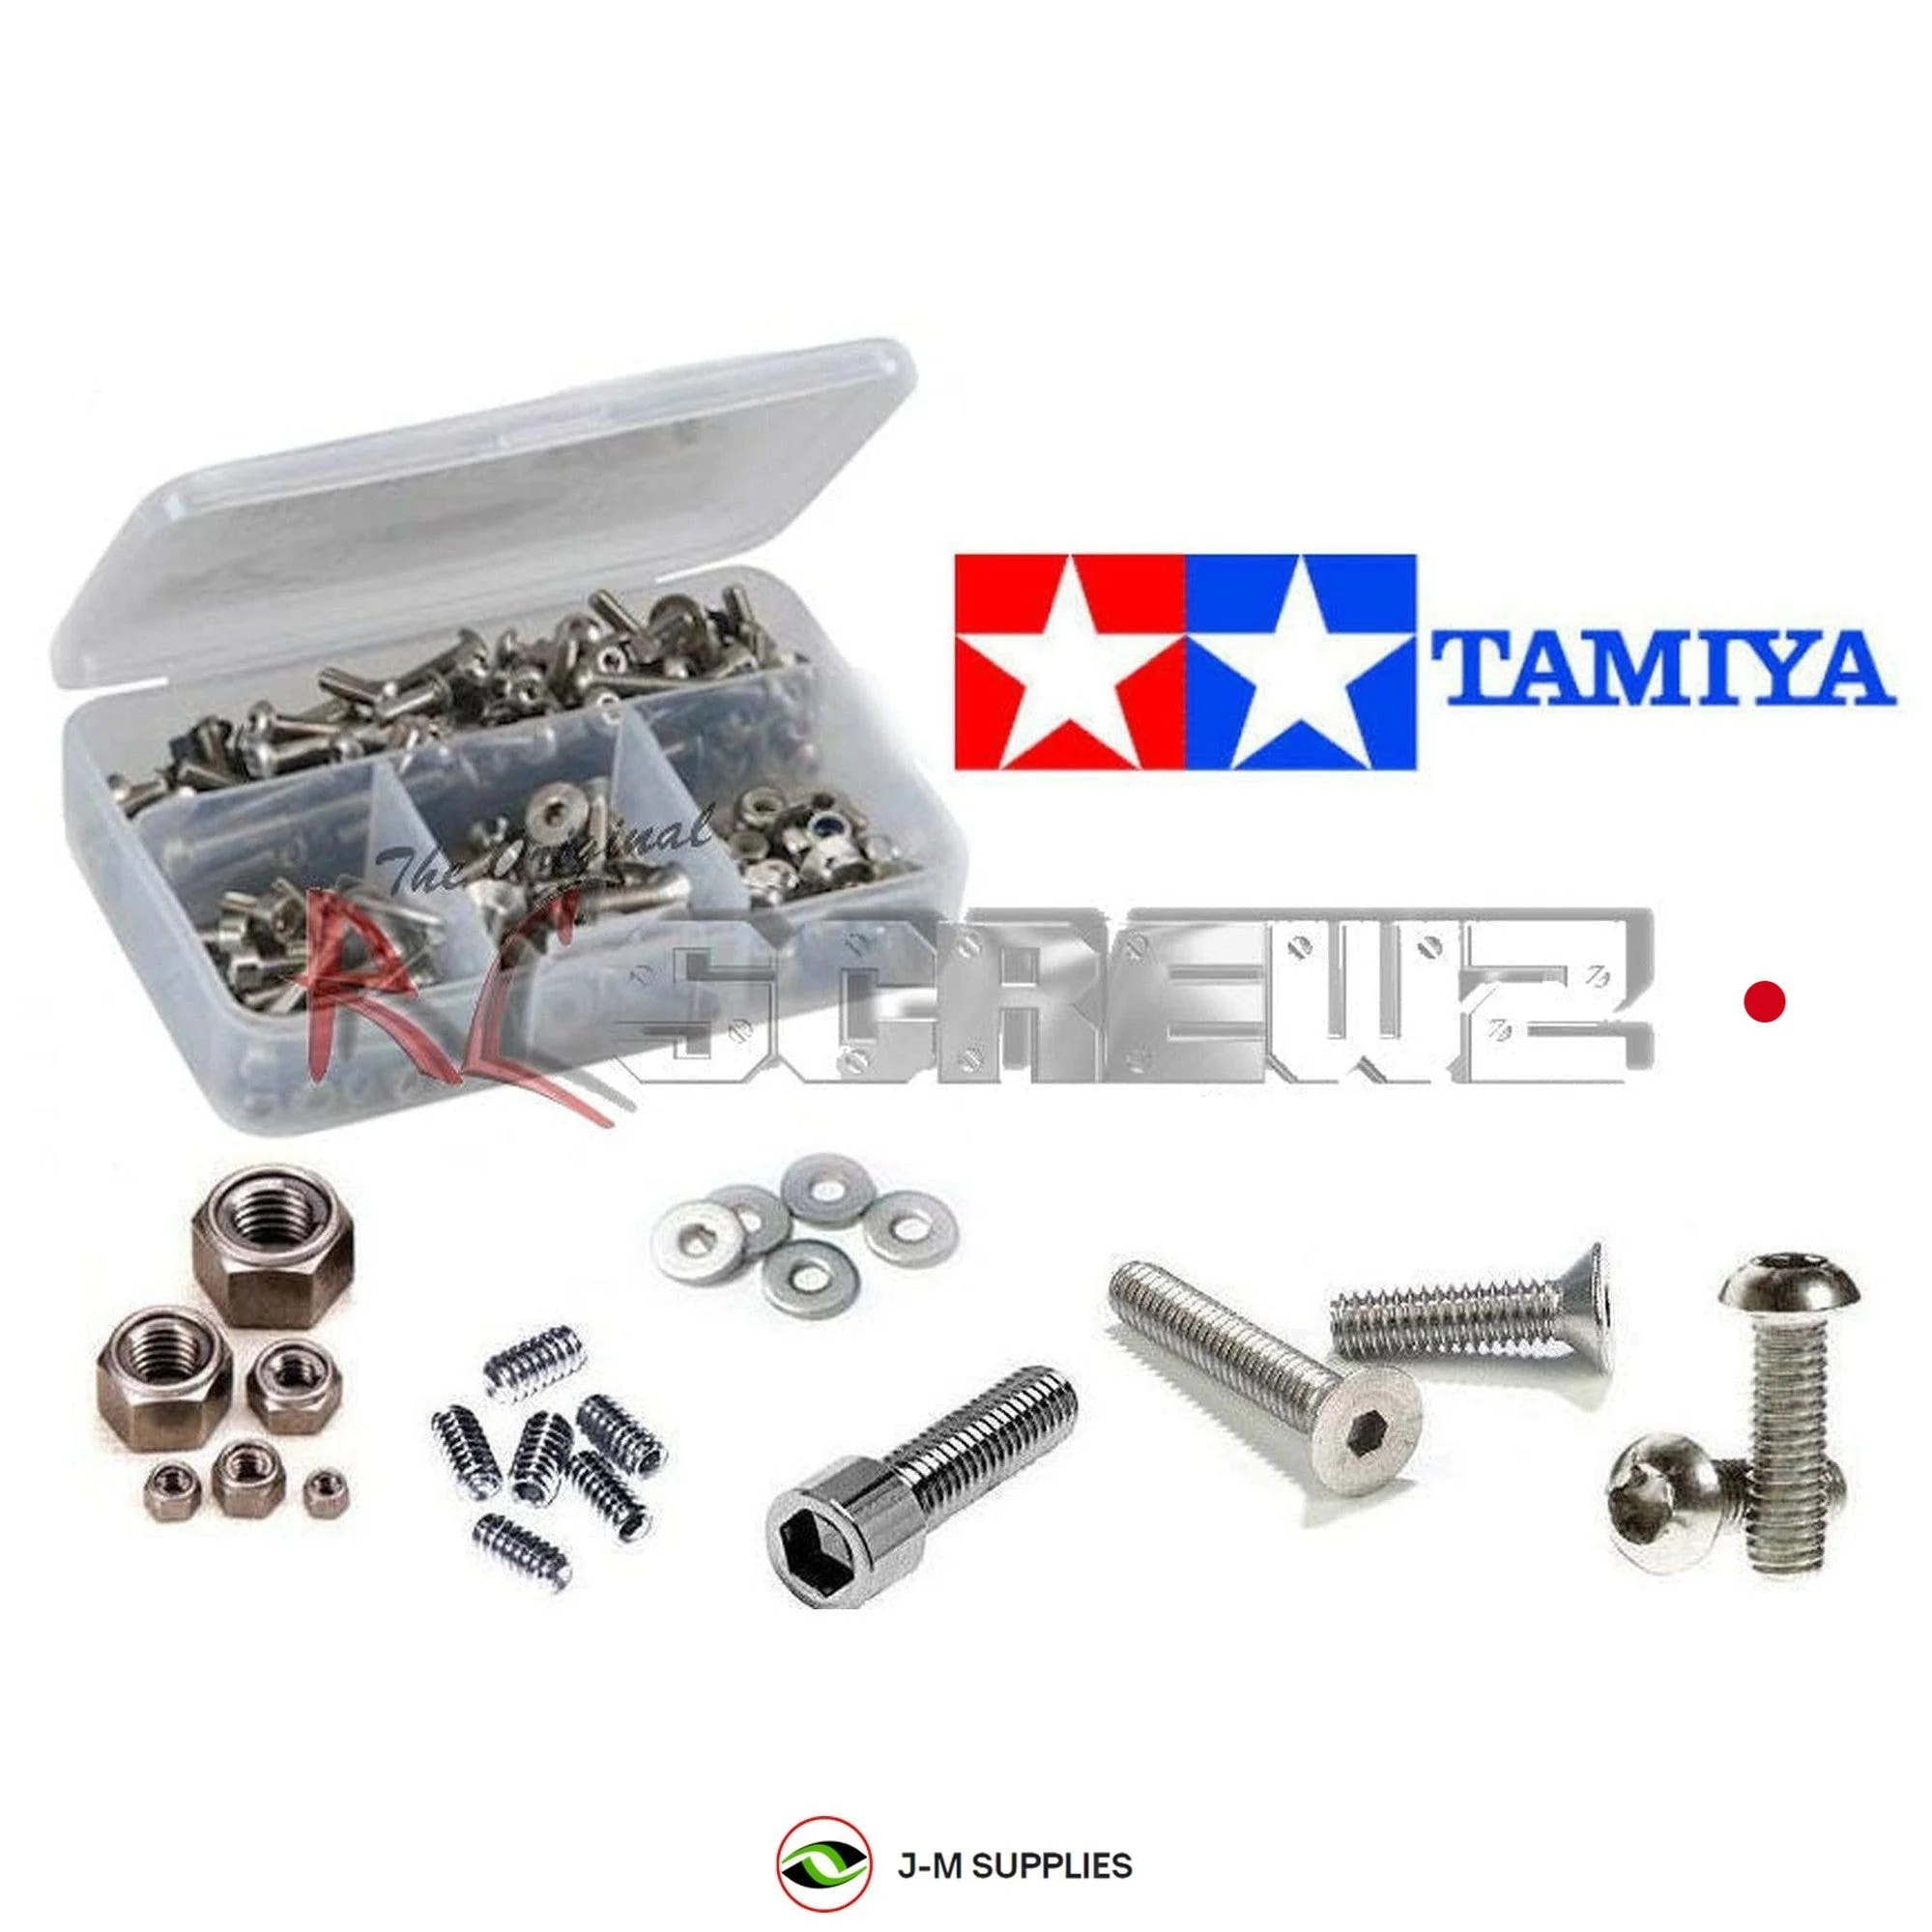 RCScrewZ Stainless Screw Kit tam062 for Tamiya FMC XR311 1/12th 2WD #58004 RC RC - Picture 1 of 12